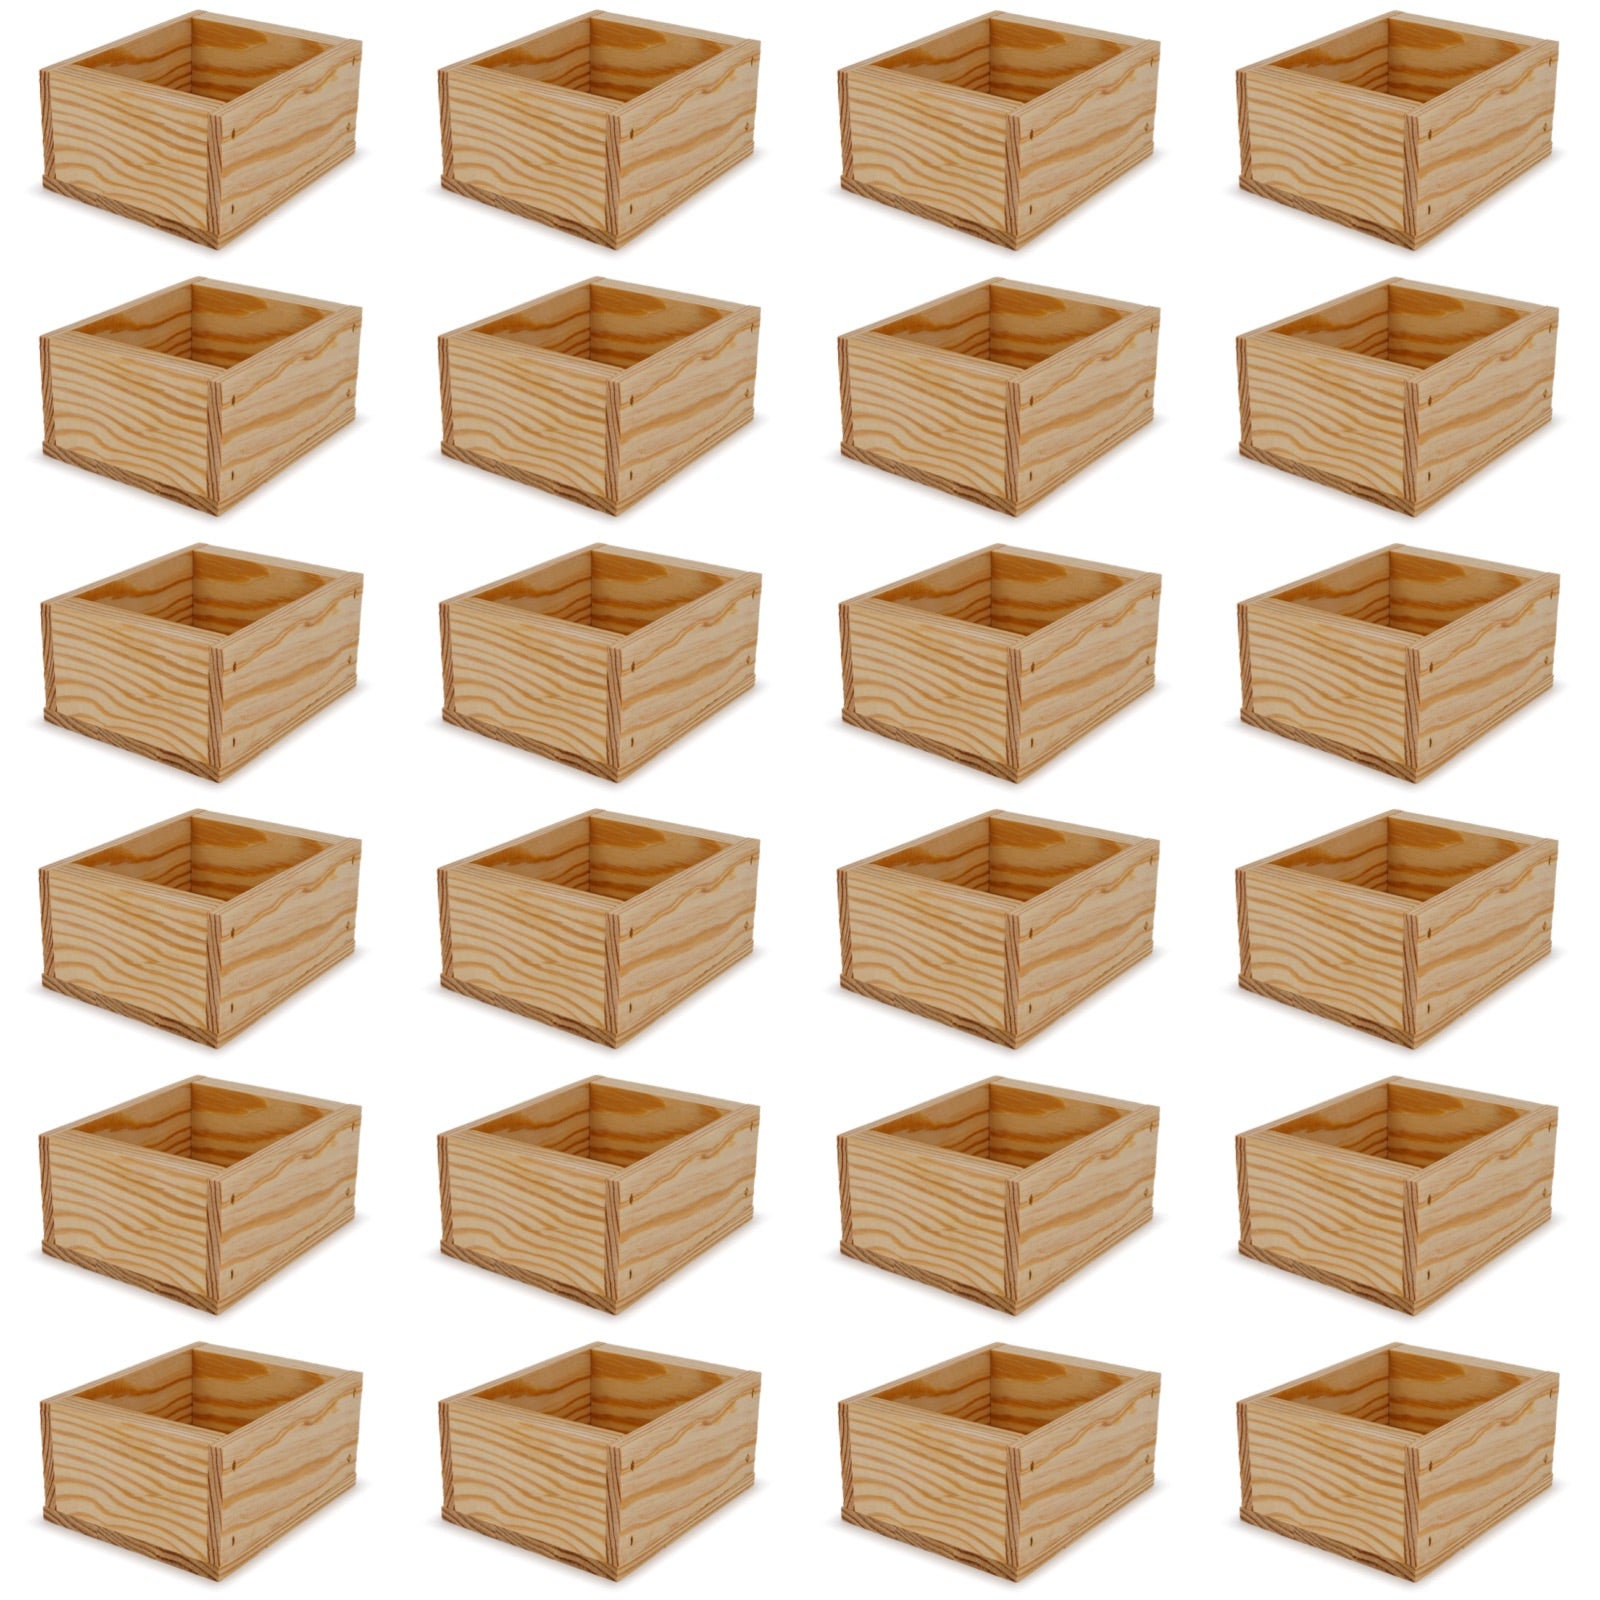 24 Small wooden crates 5x4.5x2.75